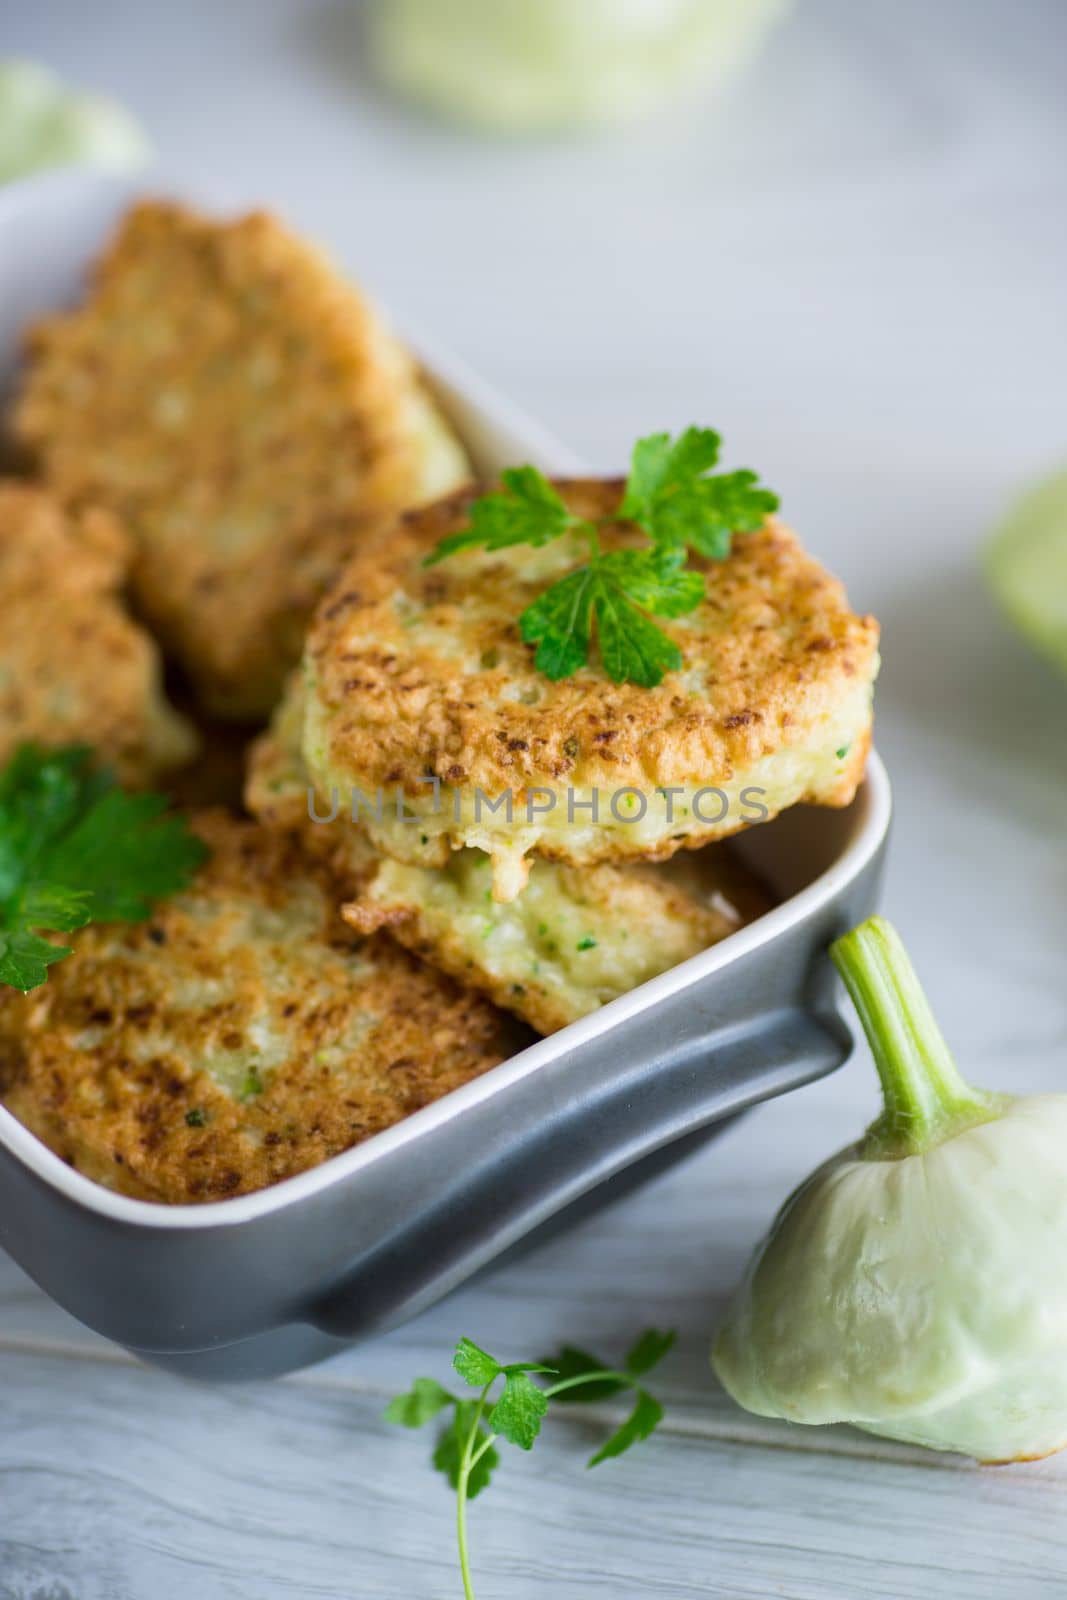 vegetable fried squash and zucchini cutlets in a ceramic form on a light wooden table